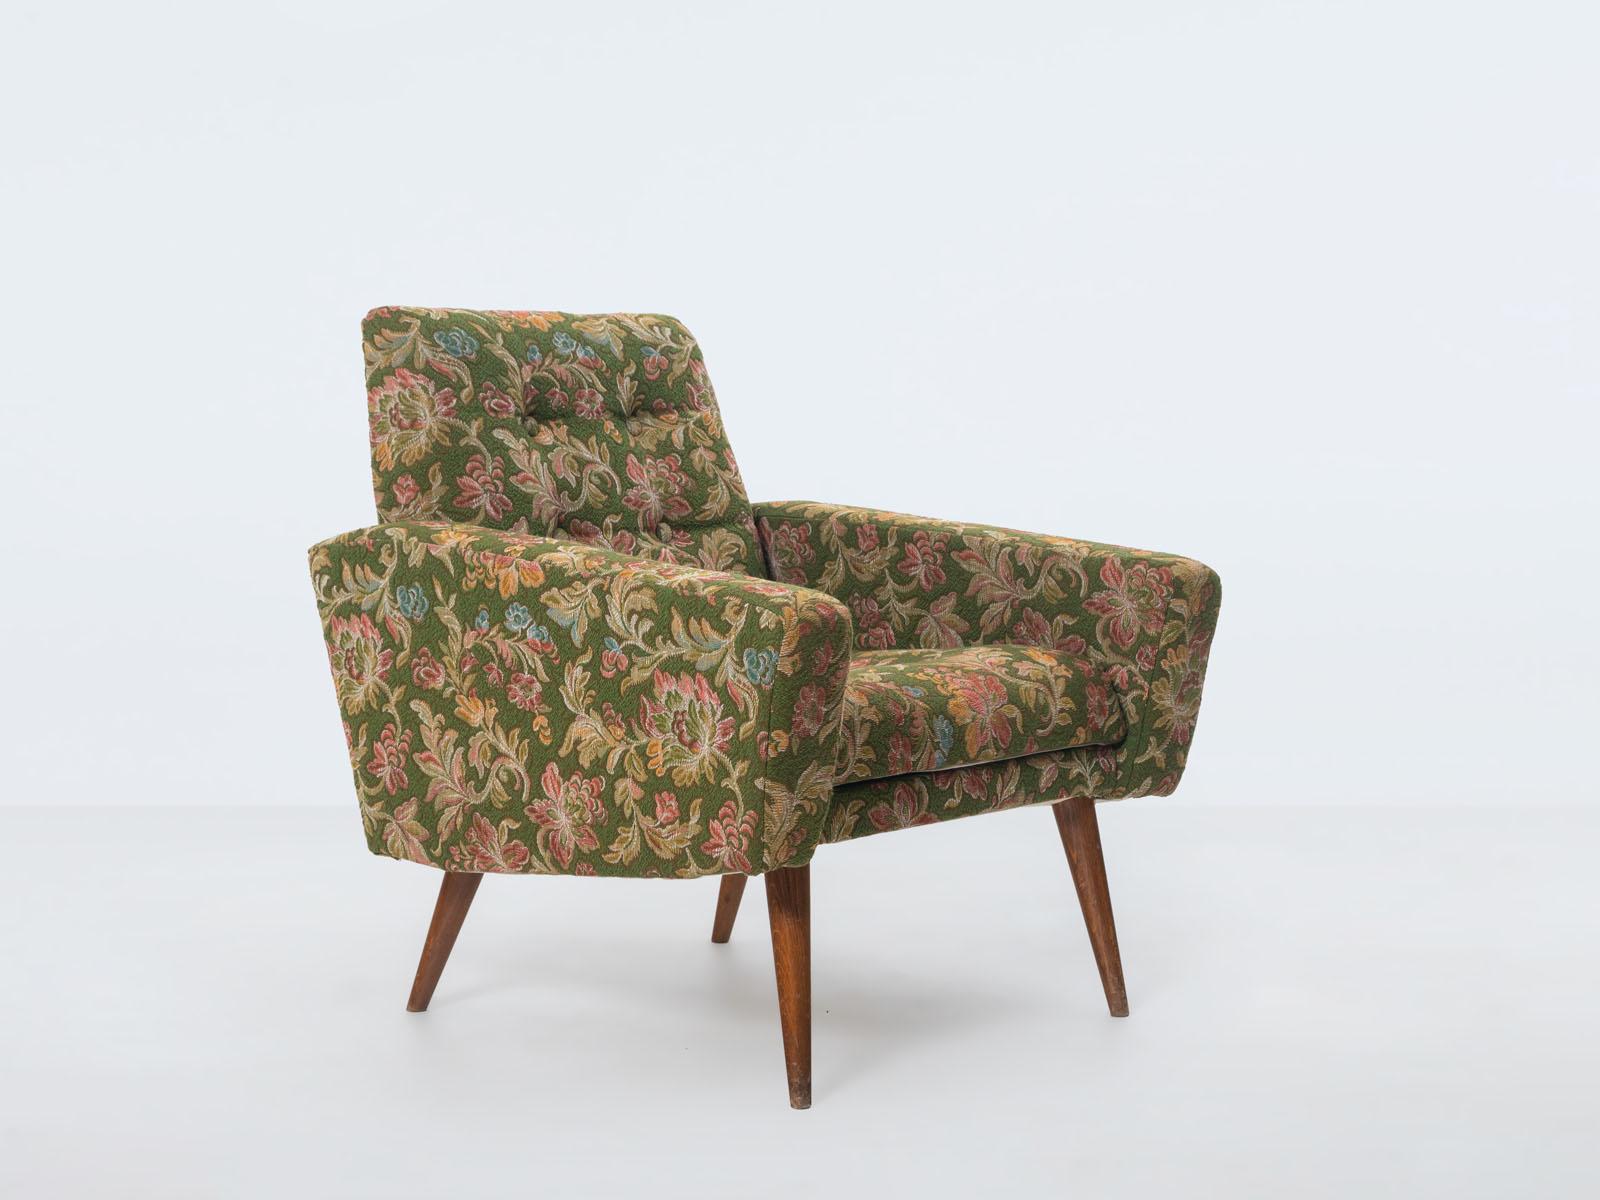 Set of two lounge chairs, Czechoslovakia, 1950s, in stained beech and green floral upholstery.
Original condition.